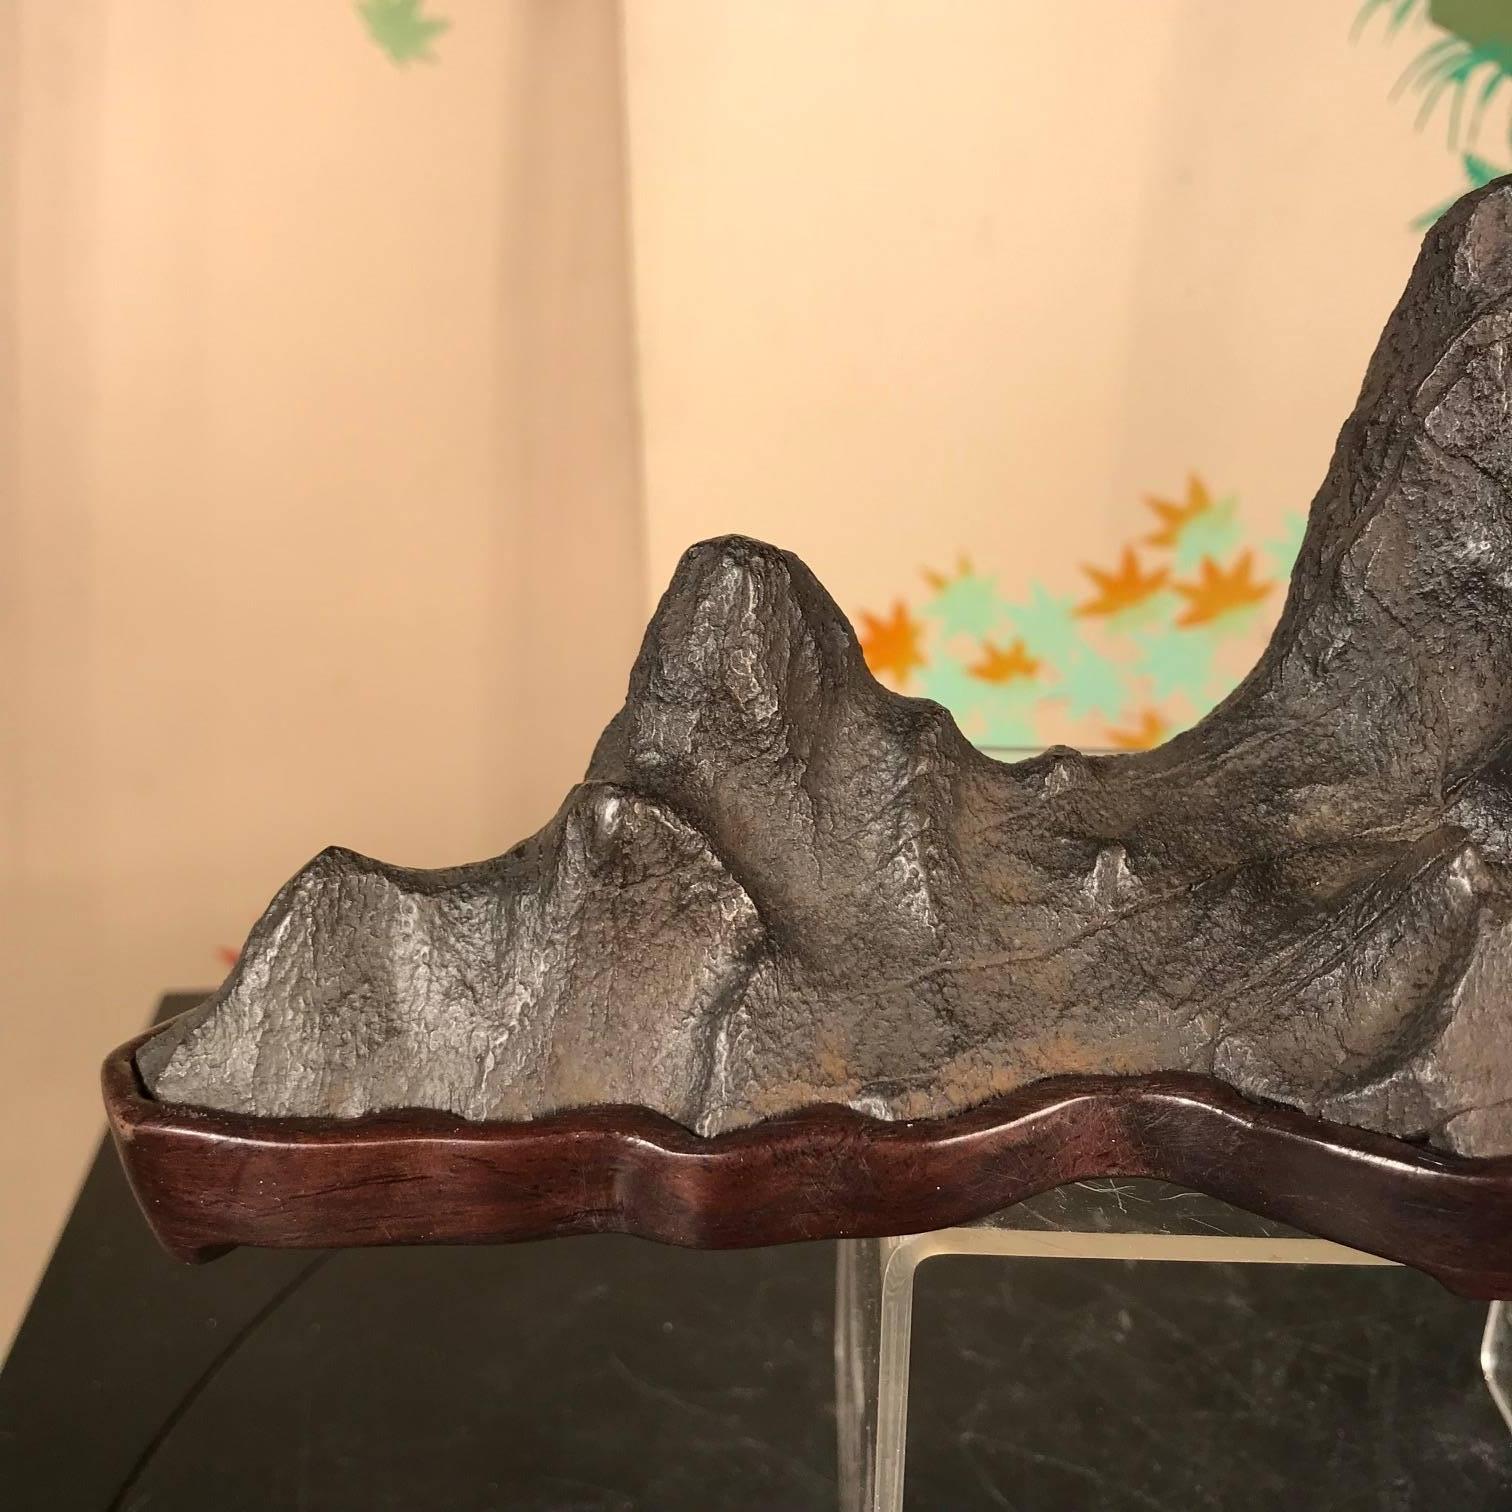 Hand-Crafted Tall Mountain Scholar Rock, Natural Bonsai Suiseki with Eight High Peaks